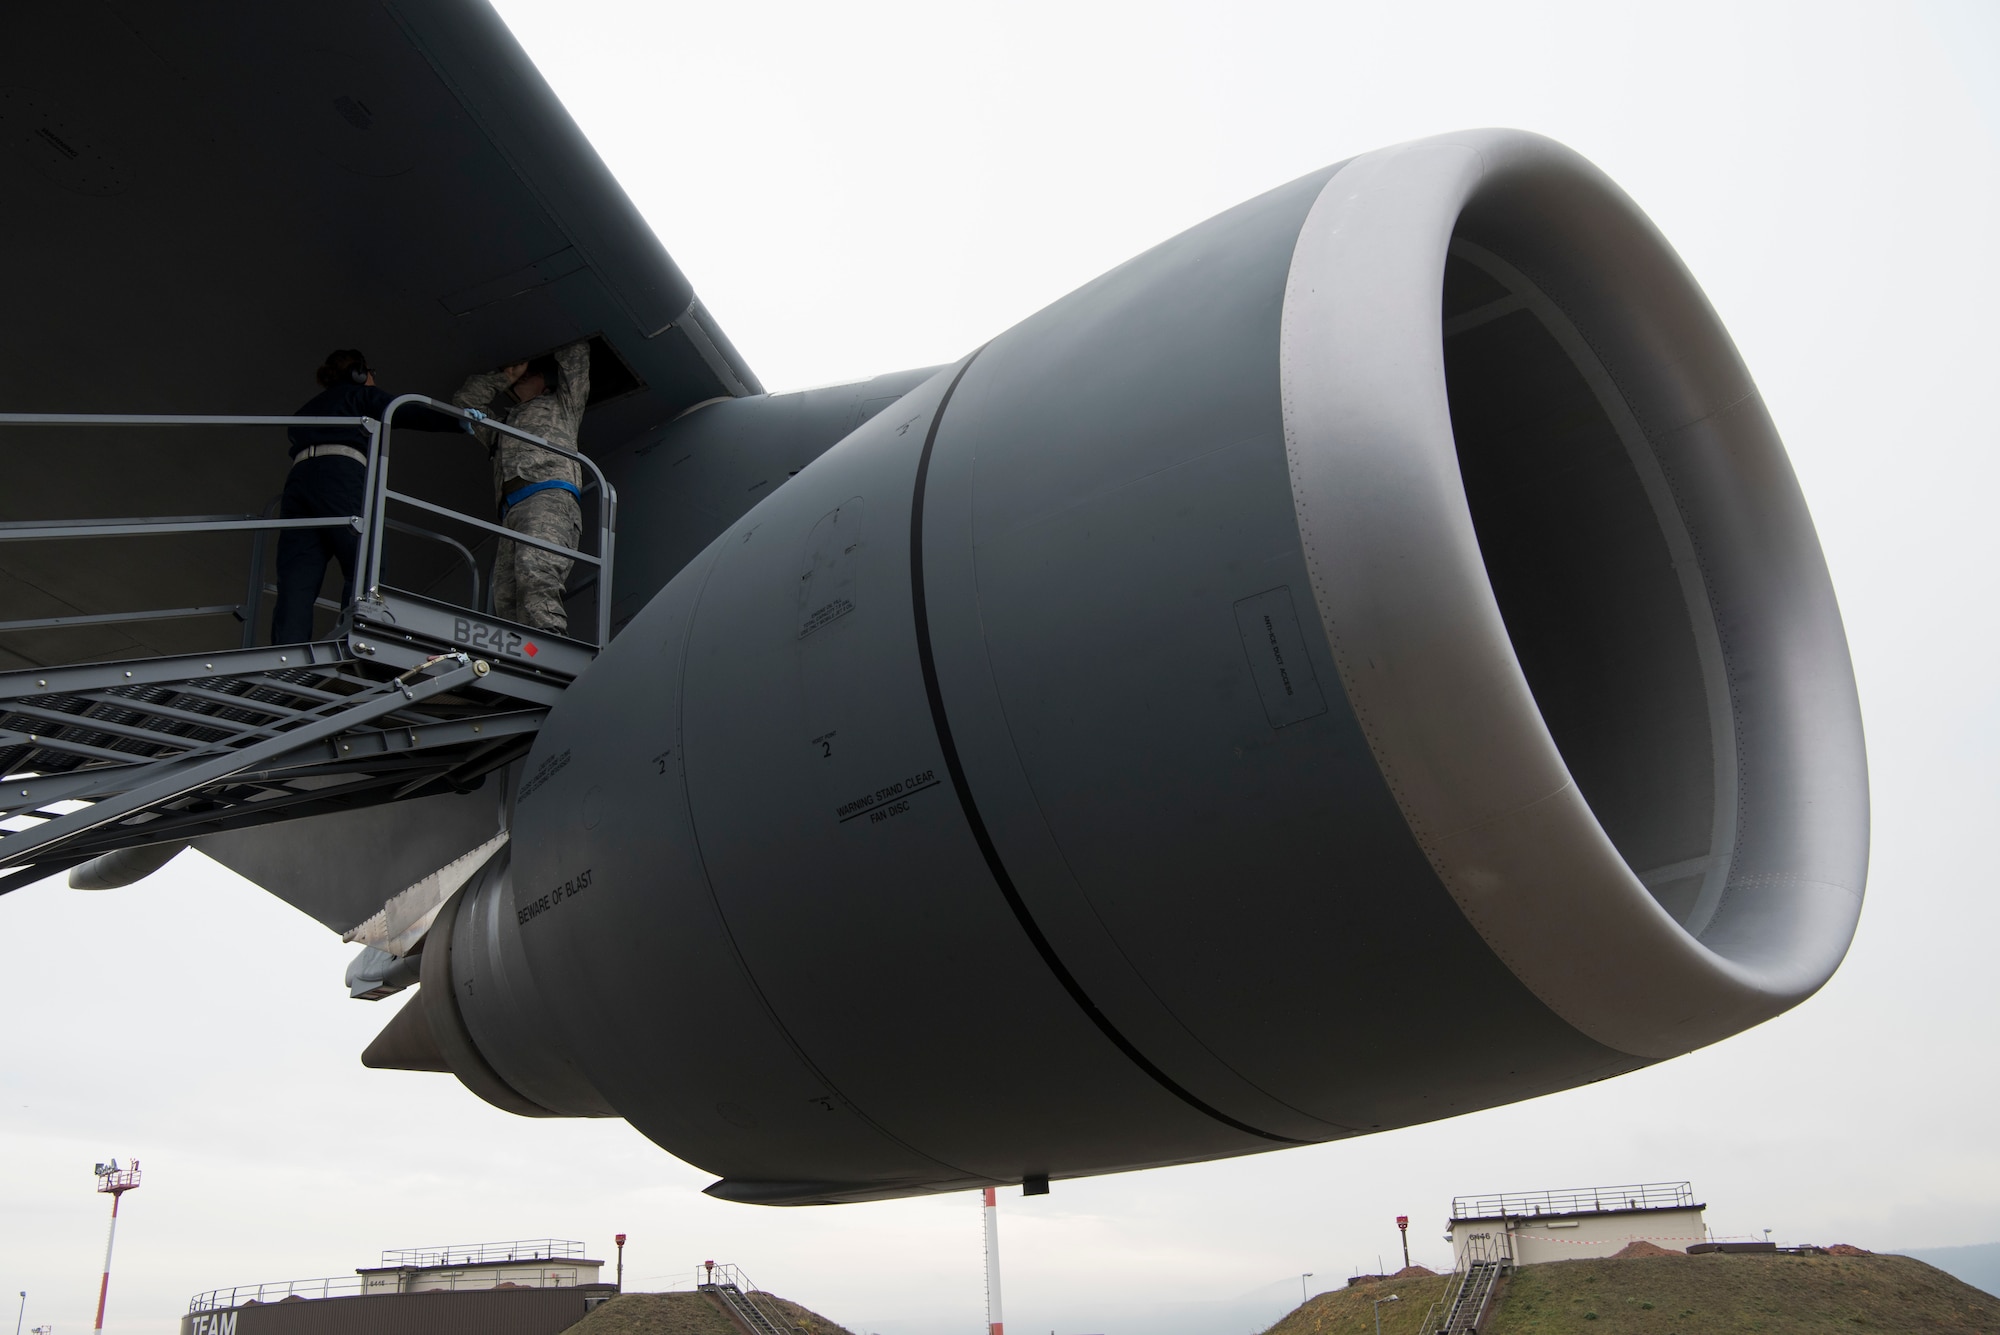 Master Sgt. Jeff Bejune, 512th Aircraft Maintenance Squadron C-17 hydraulic systems specialist, and Senior Airman Lourdes Cigarruista, 512th Maintenance Squadron C-5 hydraulic systems specialist, from Dover Air Force Base, Del., look for a hydraulic leak on a C-5M Super Galaxy at Ramstein Air Base, Germany, Nov. 29, 2018. More than 30 U.S. Air Force Reserve aircraft maintainers assigned to the 512th Airlift Wing augmented flight line maintenance operations for two weeks during a first-of-its-kind C-5 training session at Ramstein AB. (U.S. Air Force photo by Staff Sgt. Aaron J. Jenne)